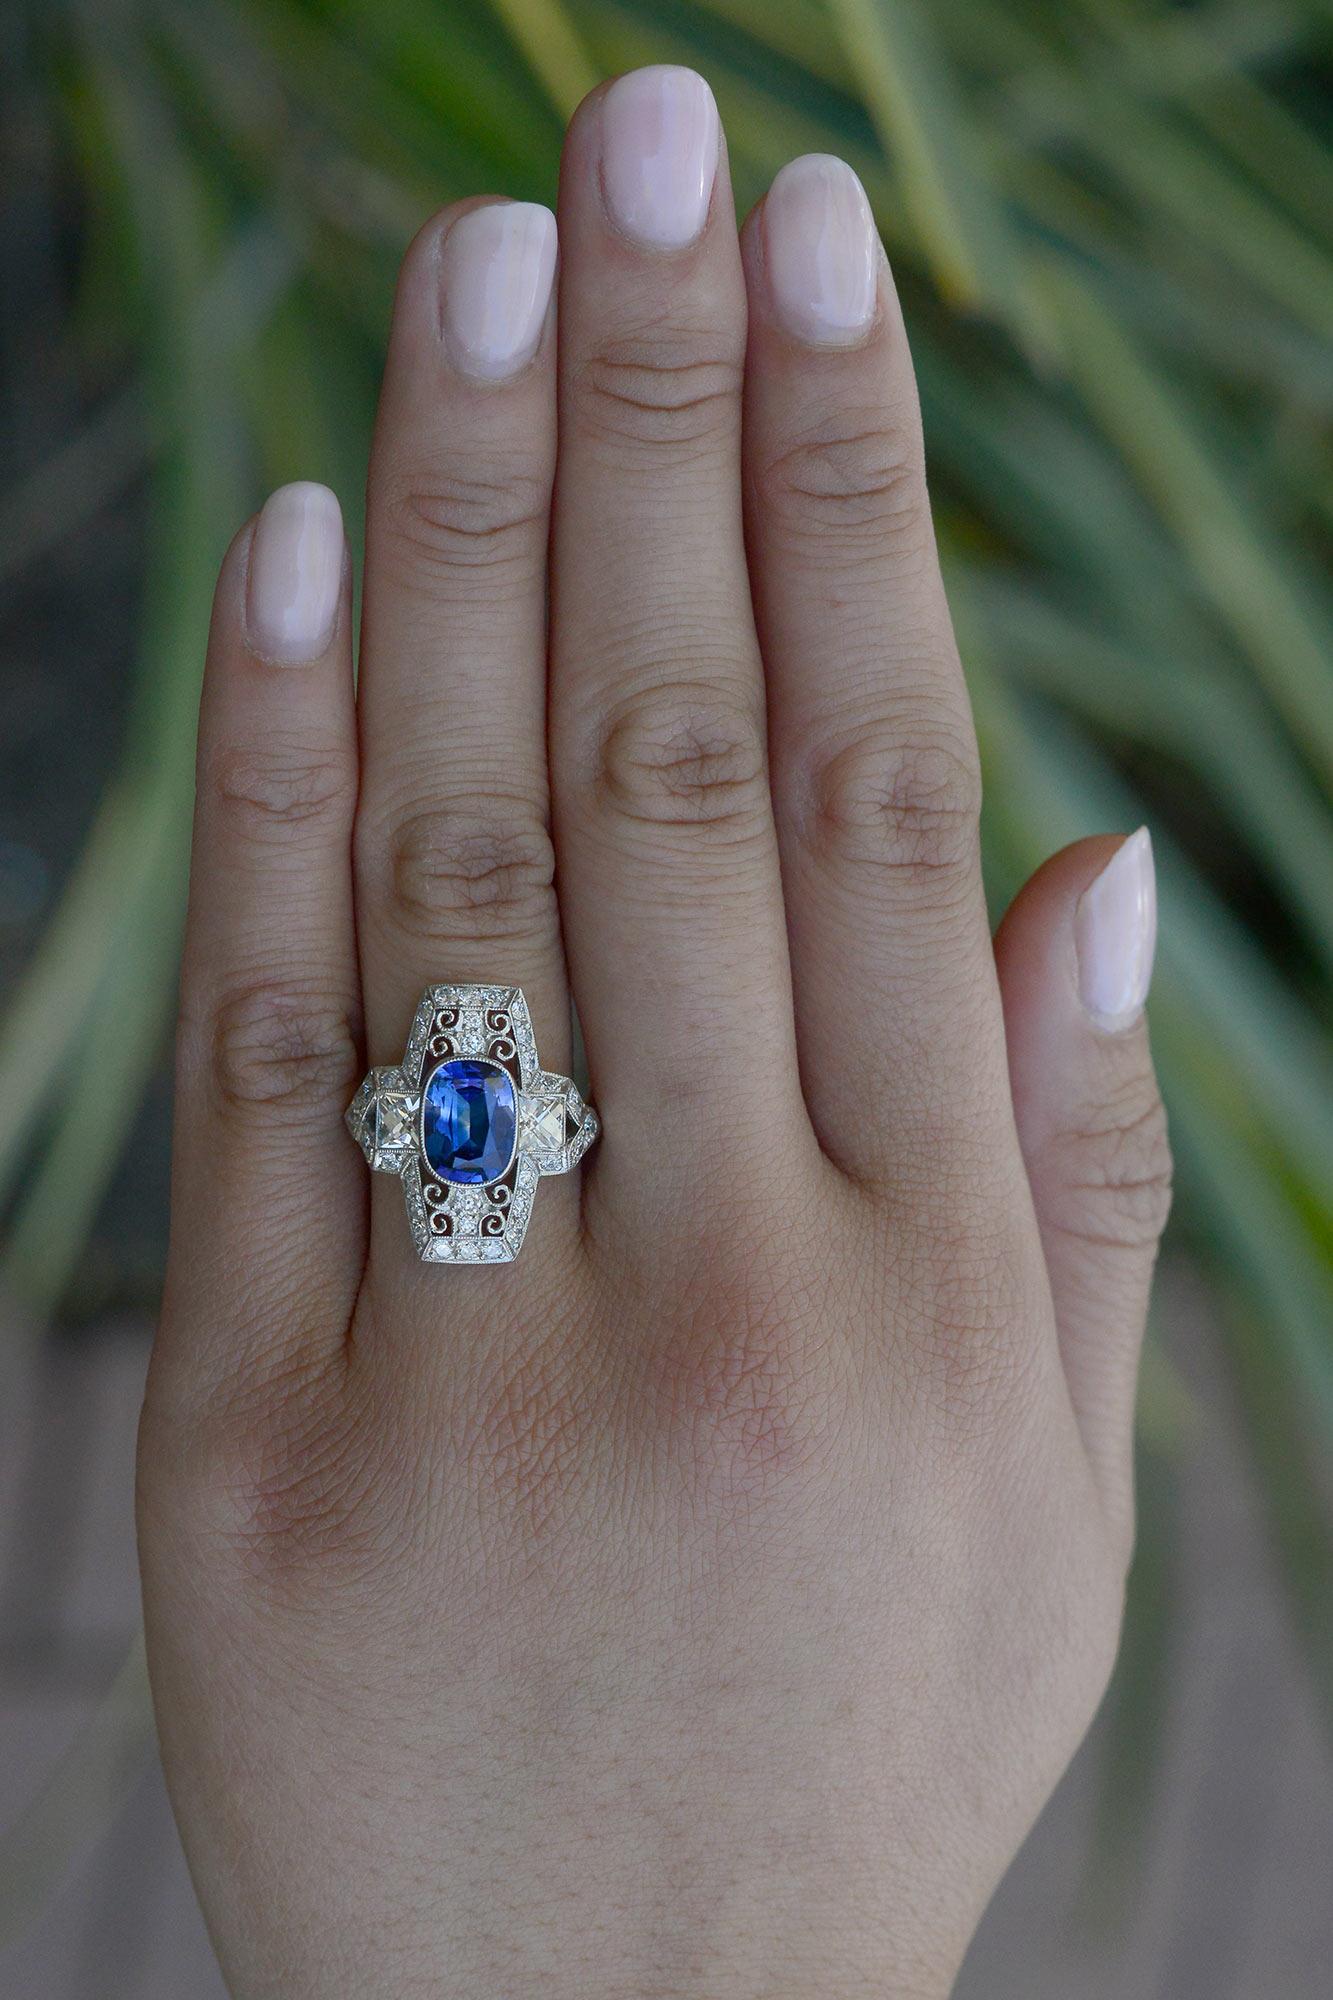 Crafted in reminiscence of the great Belle Epoque era, this elongated filigree engagement ring makes a major statement. The 2.13 carat cushion cut Ceylon sapphire exhibits a lustrous, vivid blue and is well balanced with the surrounding platinum